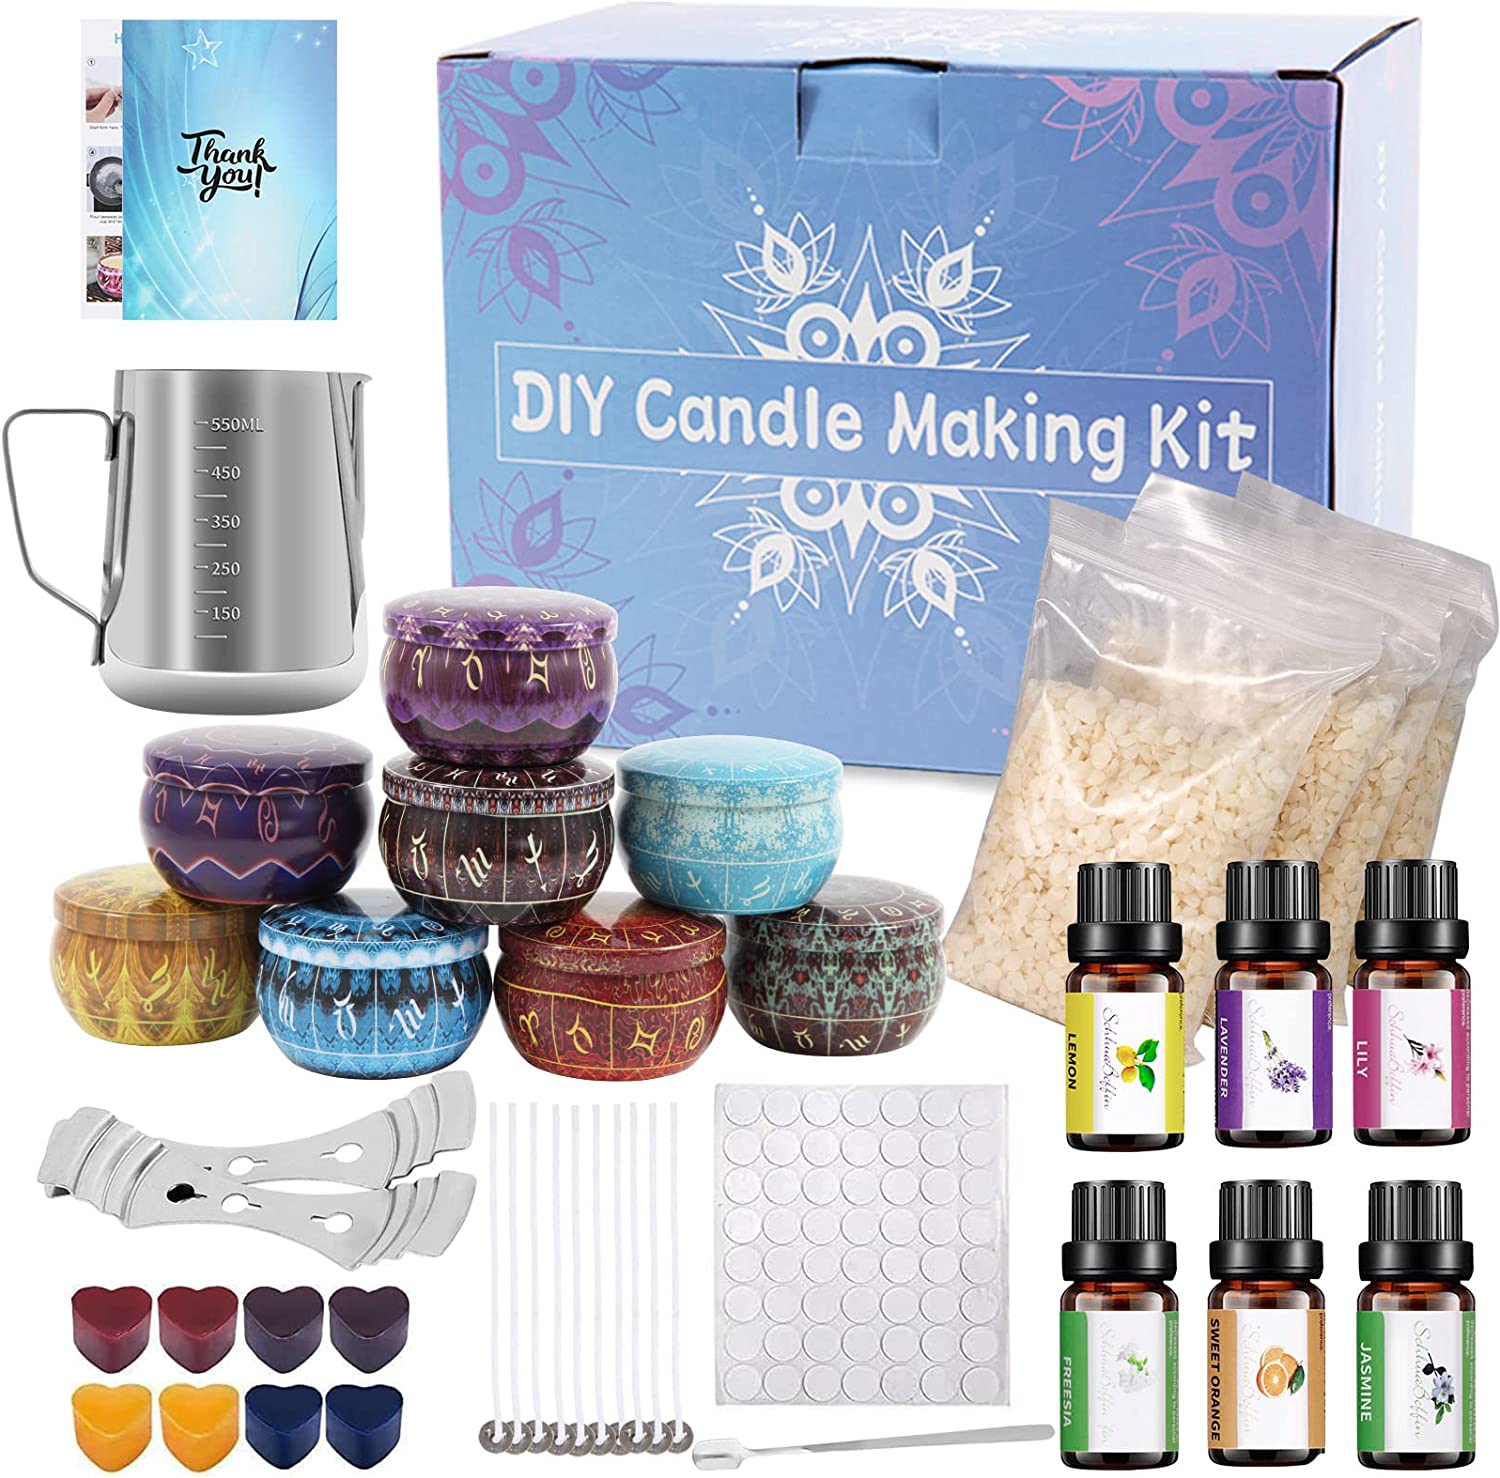 SAEUYVB Candle Making Kit - Candle Making Kit for Adults - Soy